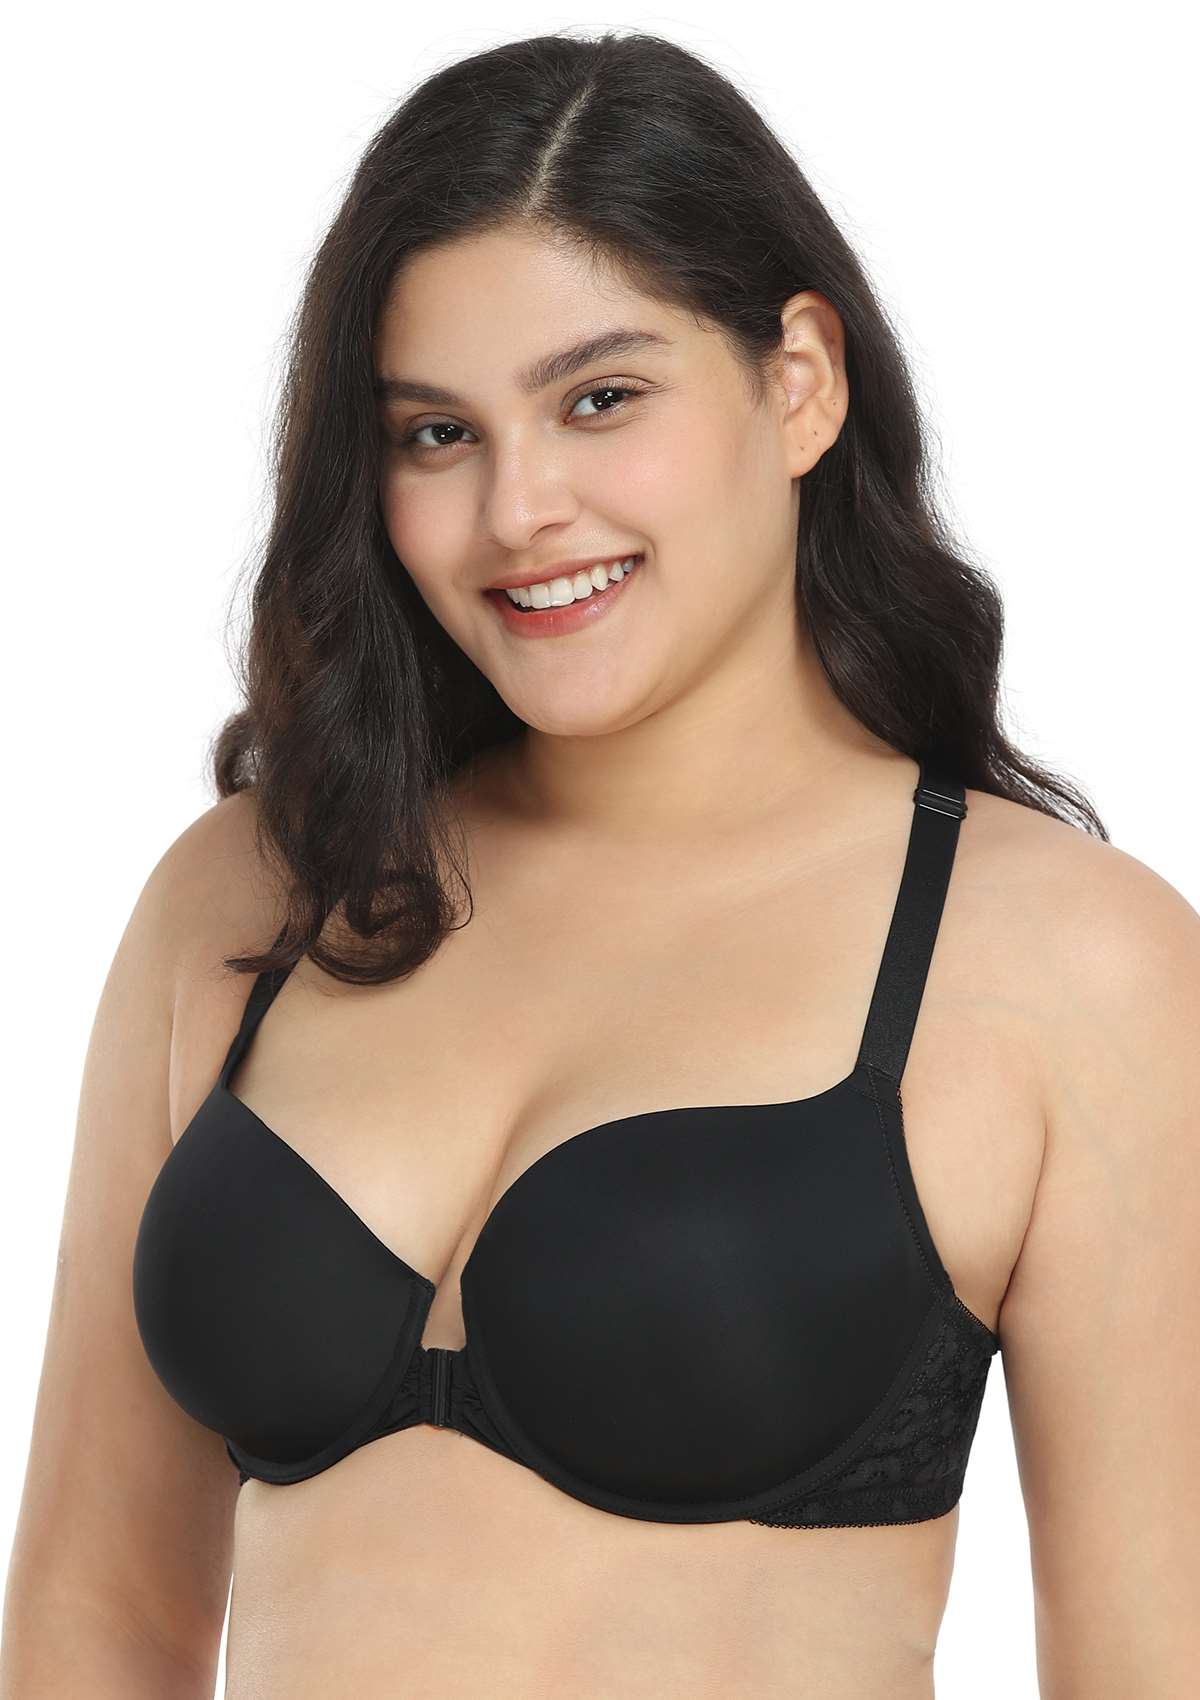 HSIA Serena Front-Close Lace Racerback Underwire Bra For Back Support - Black / 36 / D